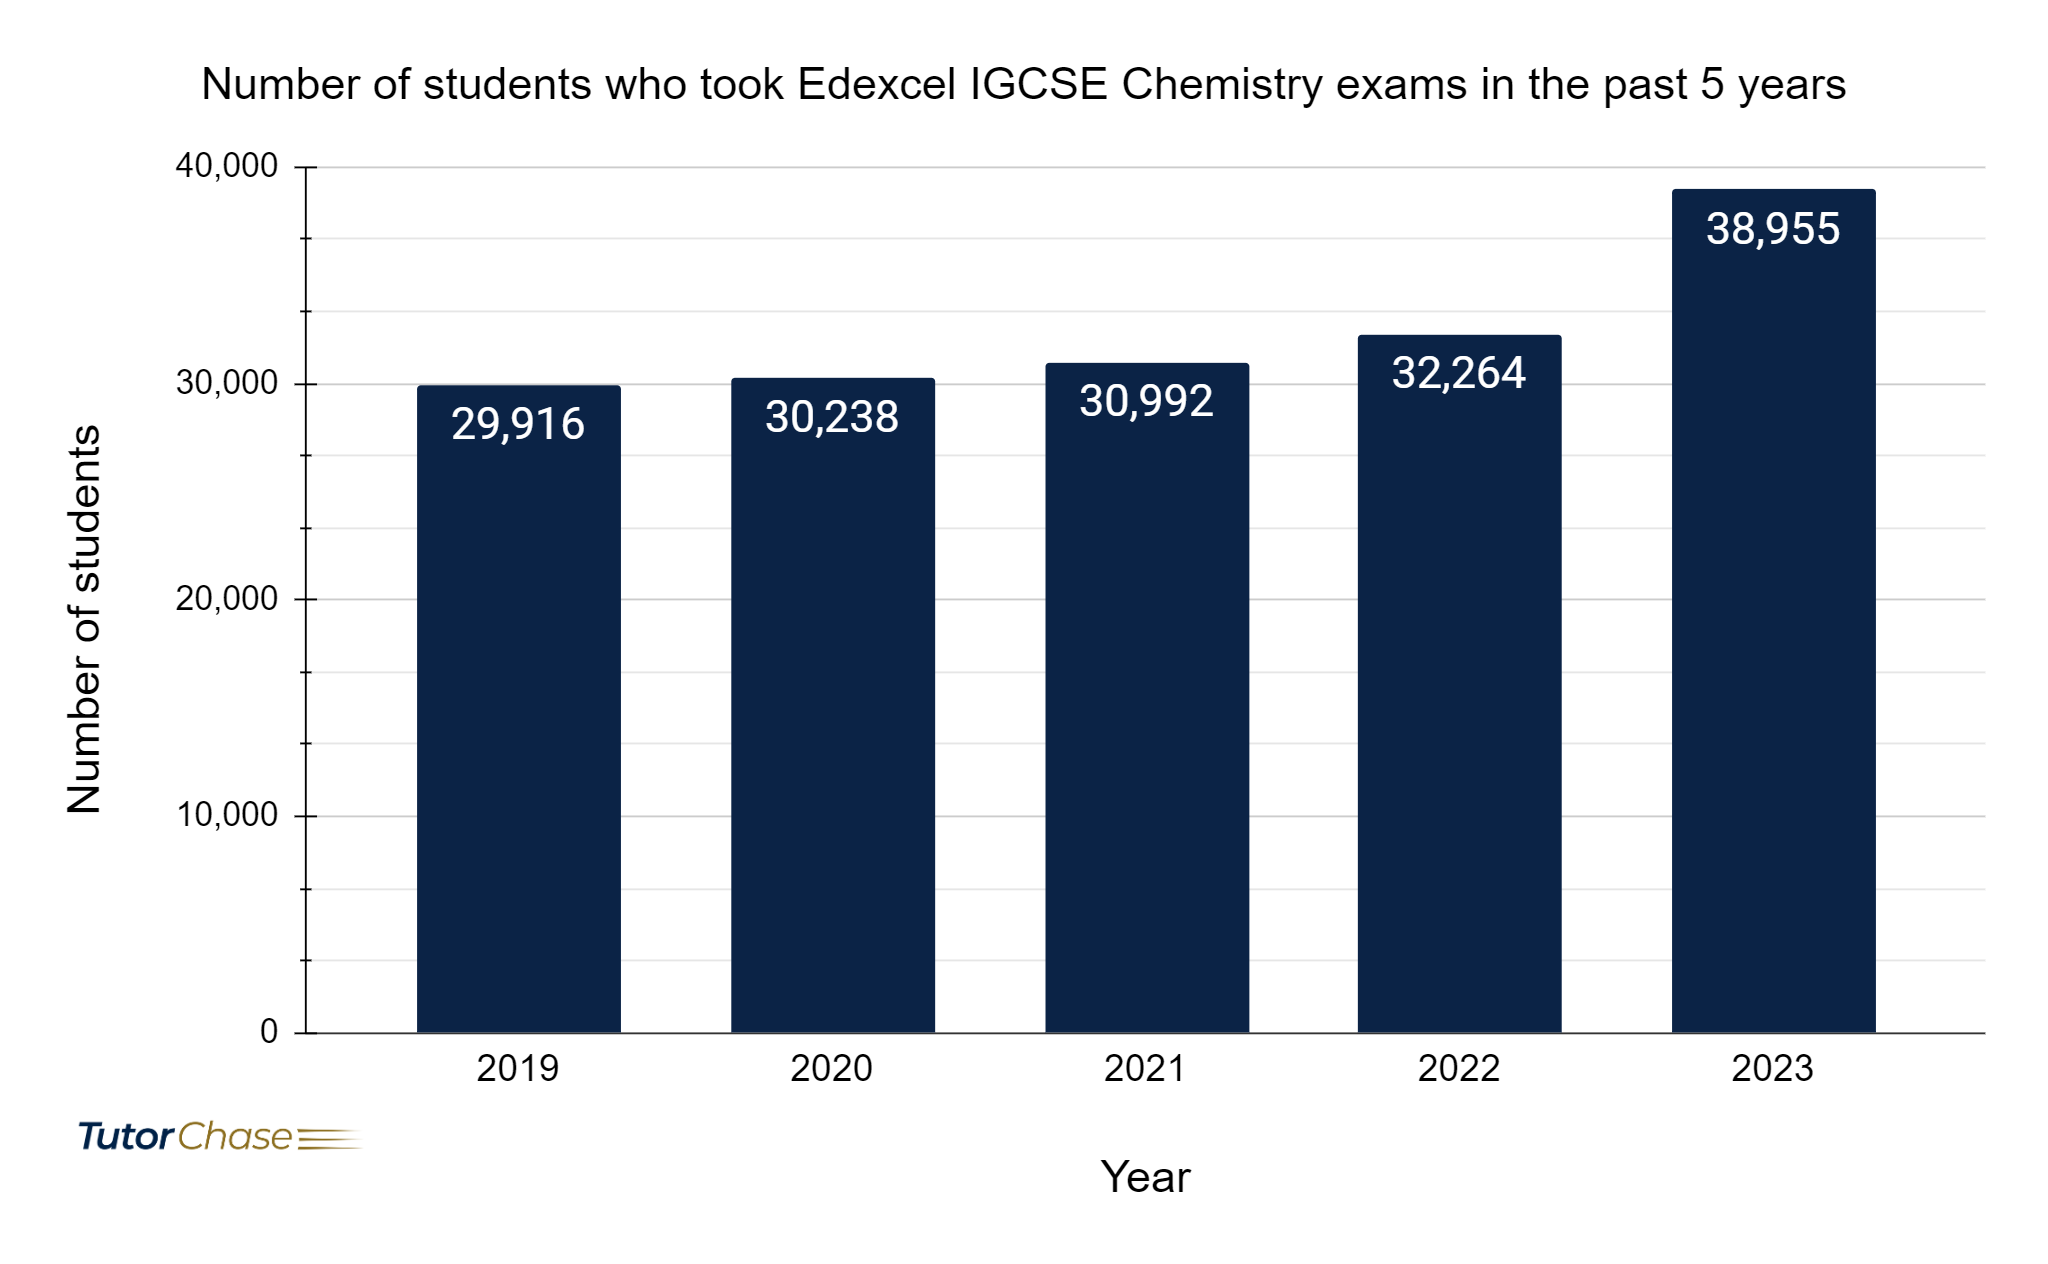 Number of students who took Edexcel IGCSE Chemistry exams in the past 5 years